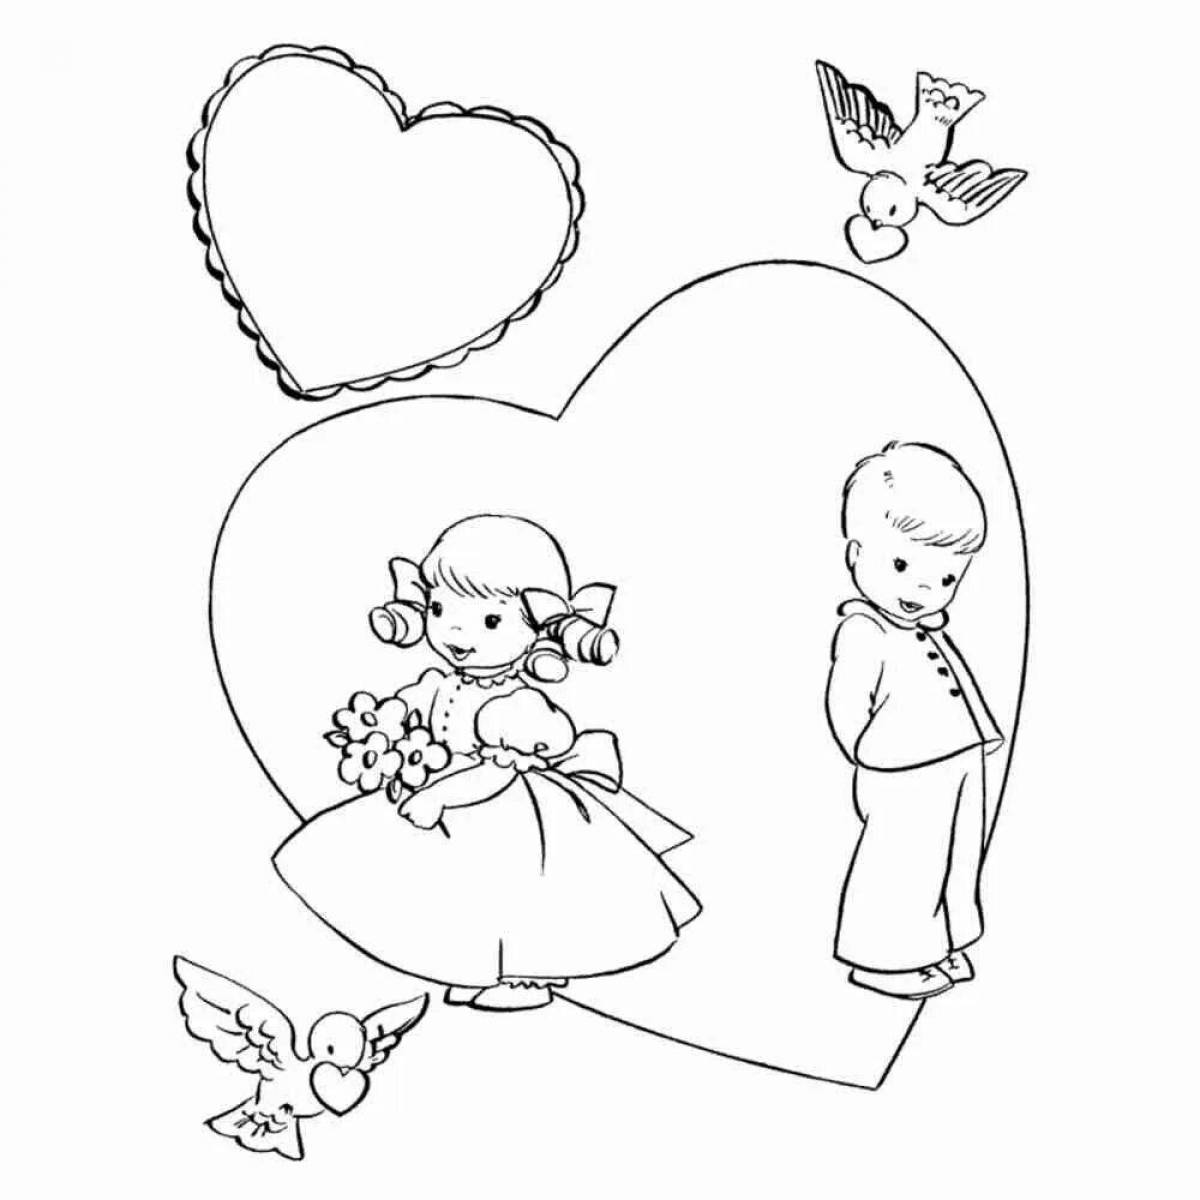 Sweet valentine's day coloring book